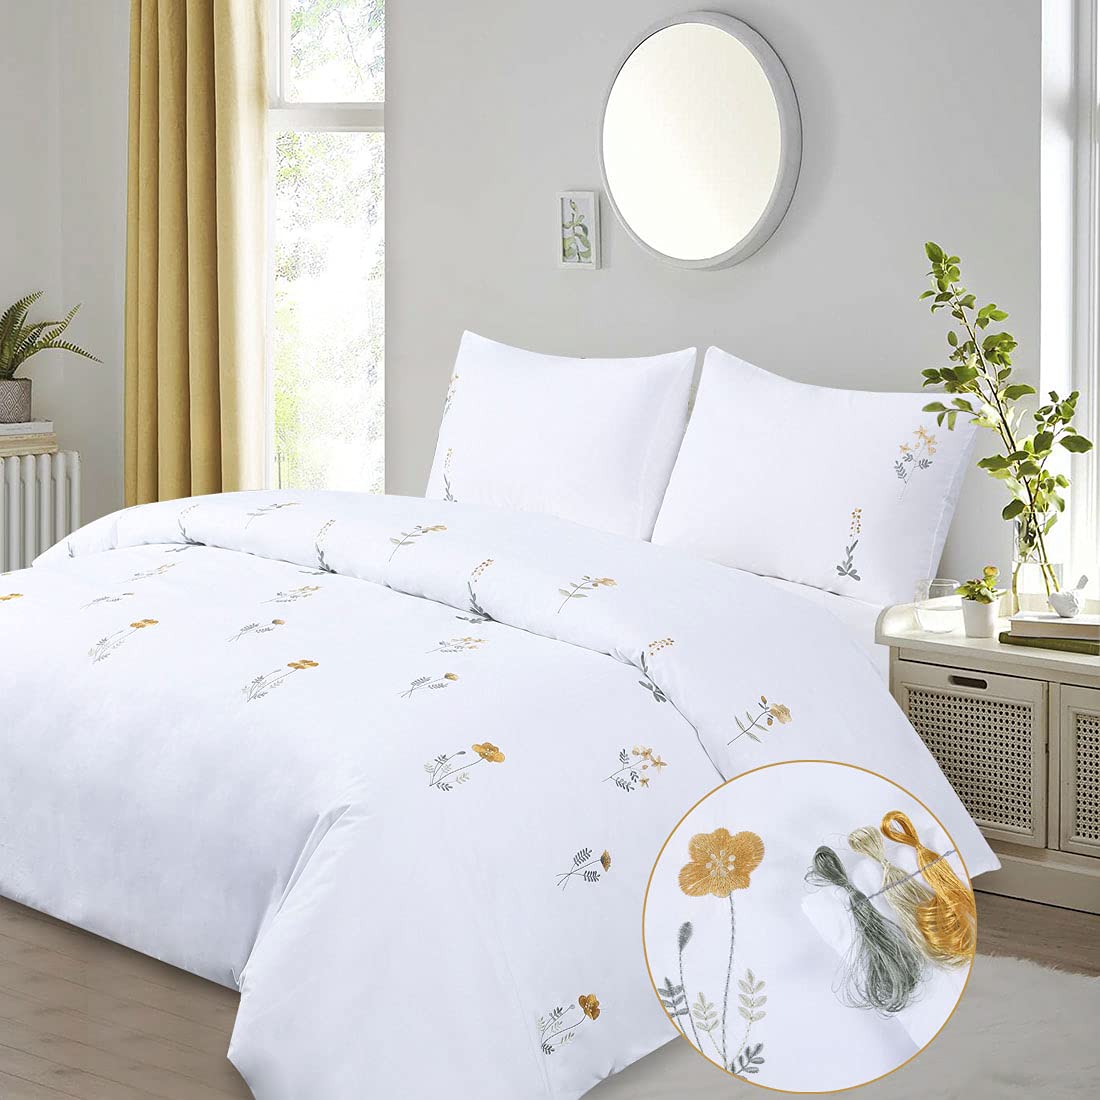 Floral Duvet Cover Set Double White Yellow Flower Embroidered Bedding Set Cottagecore Elegant Botanical Wildflower French Country Cottage Fresh Summer Blossom 3 Pieces 200x200 Girls